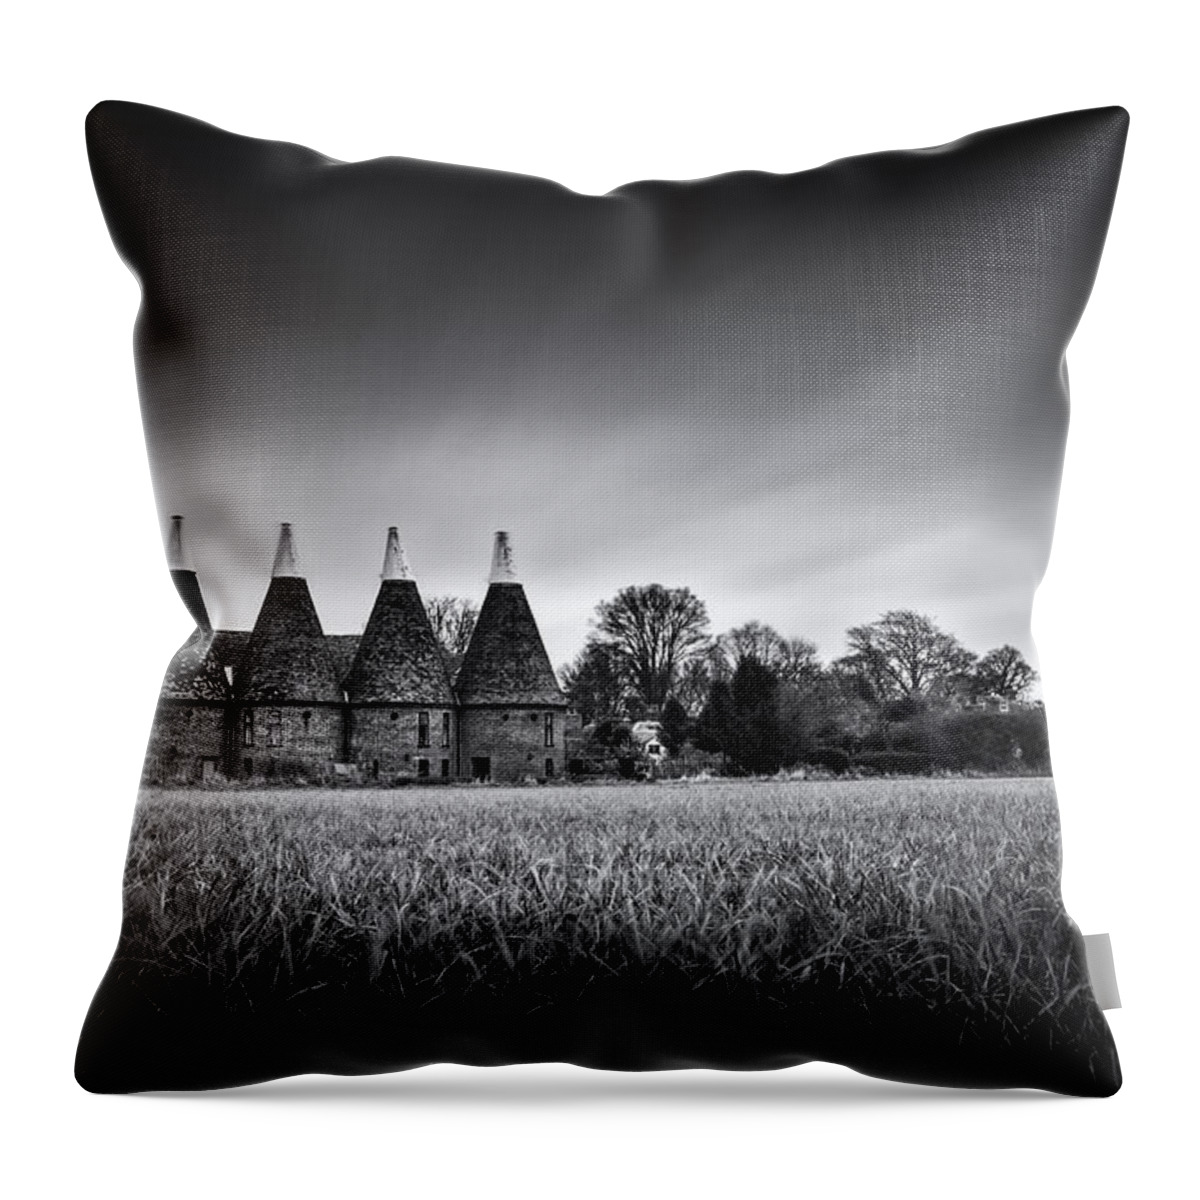  Kent Throw Pillow featuring the photograph The Oast Houses by Ian Hufton